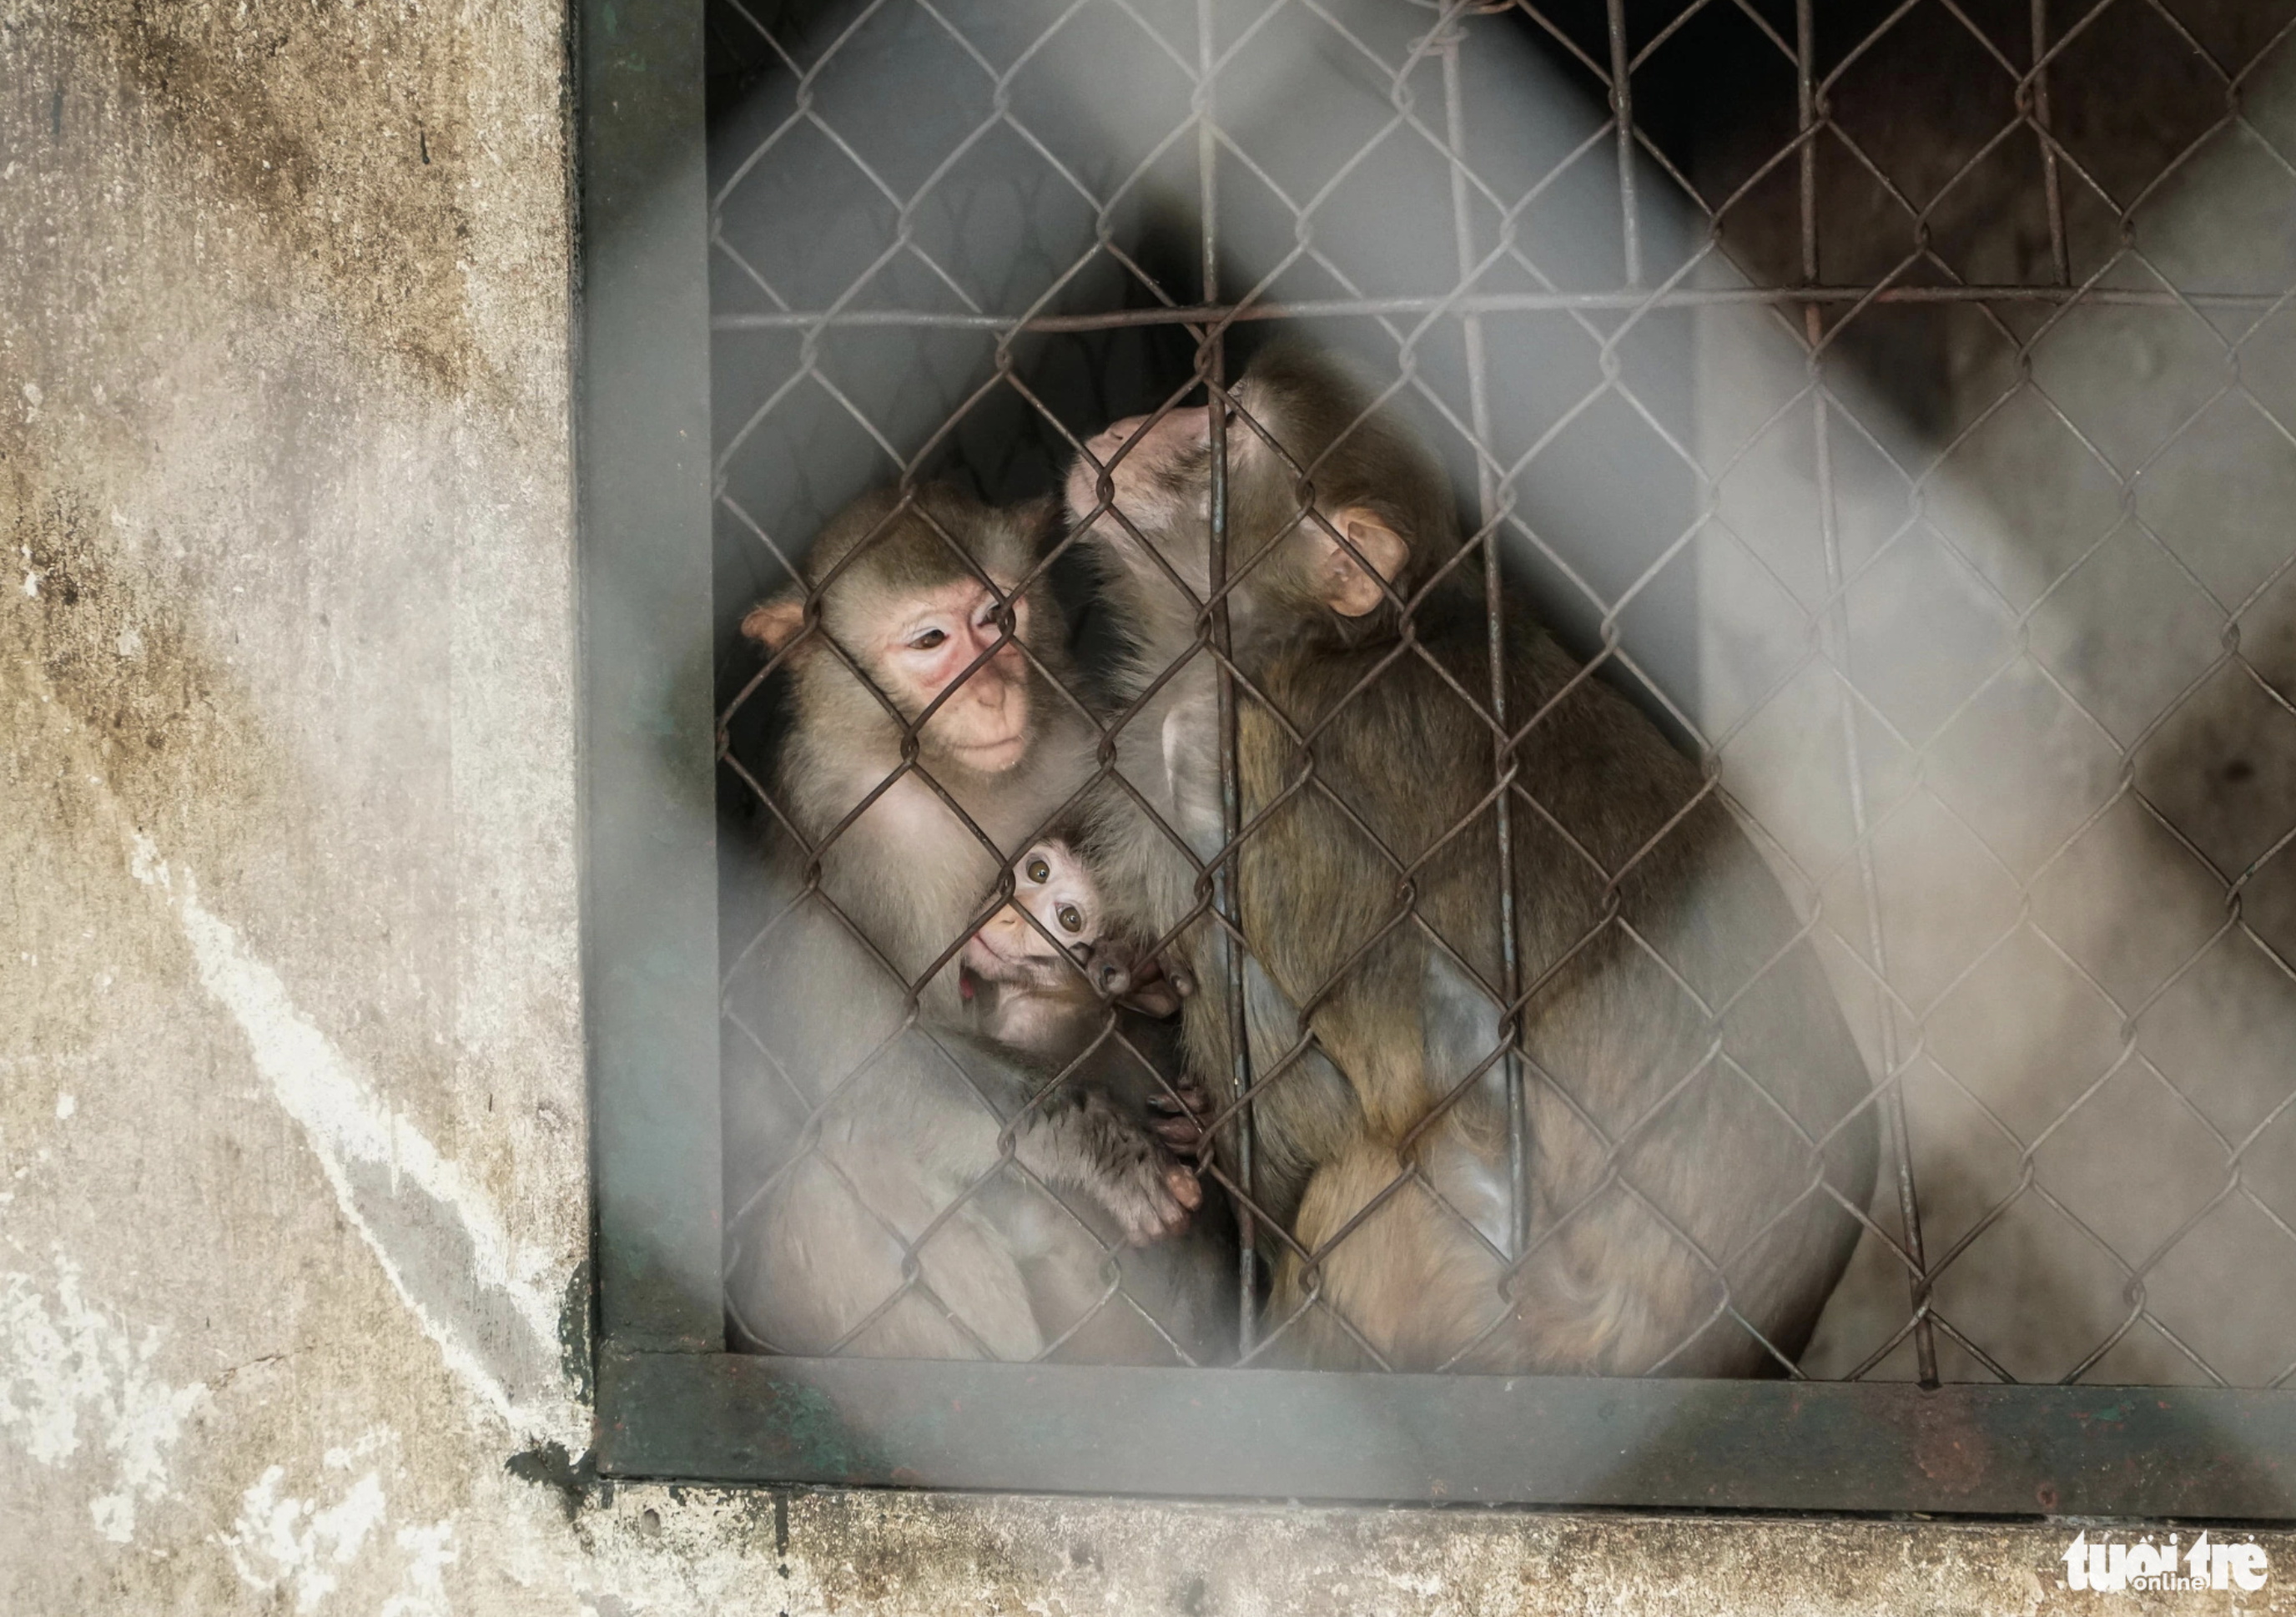 Monkeys huddle together for warmth at Hanoi zoo